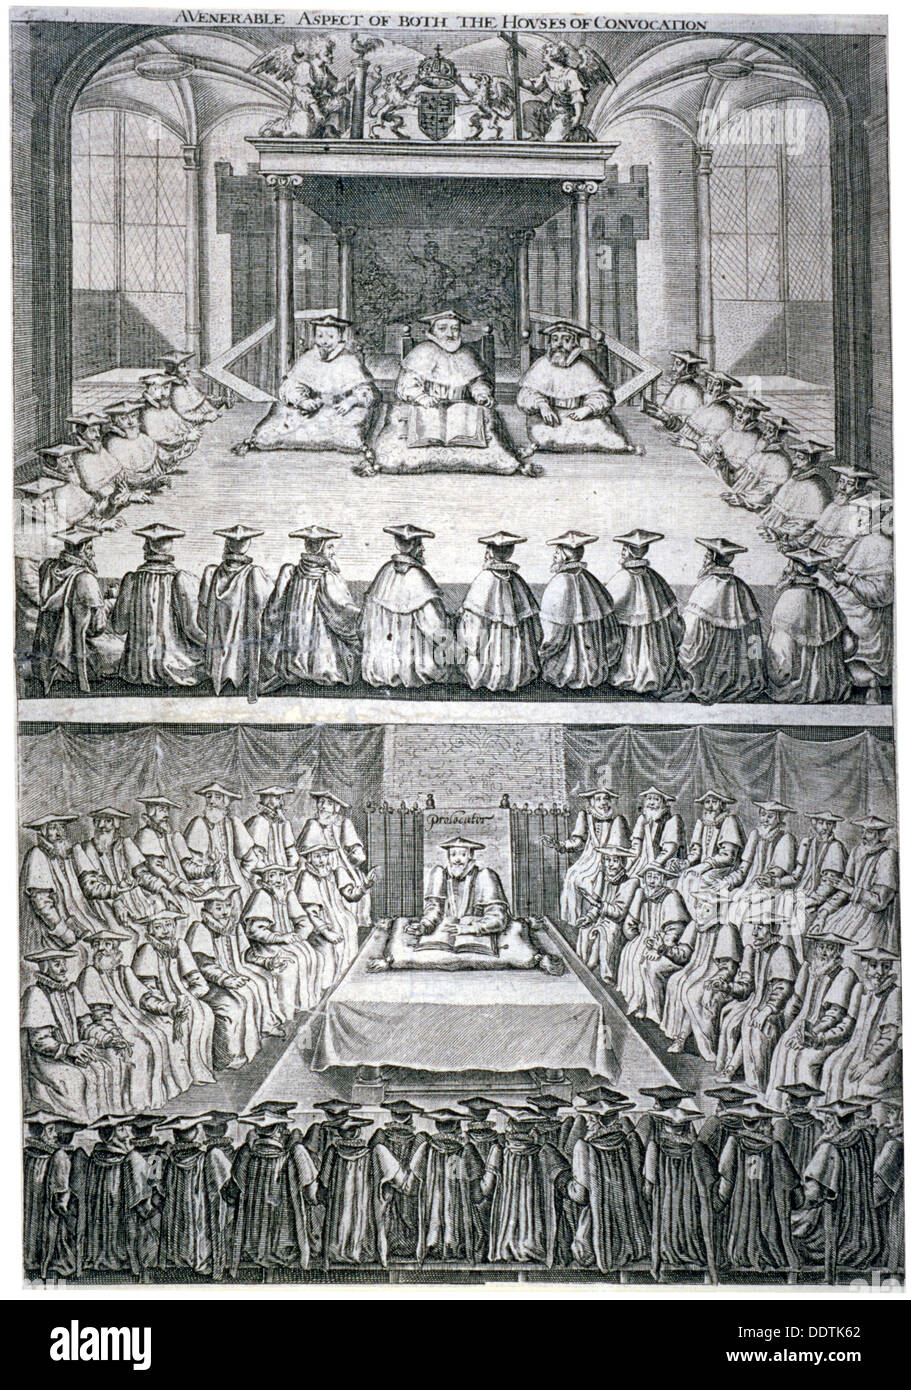 Houses of Convocation, London, c1623. Artist: Anon Stock Photo